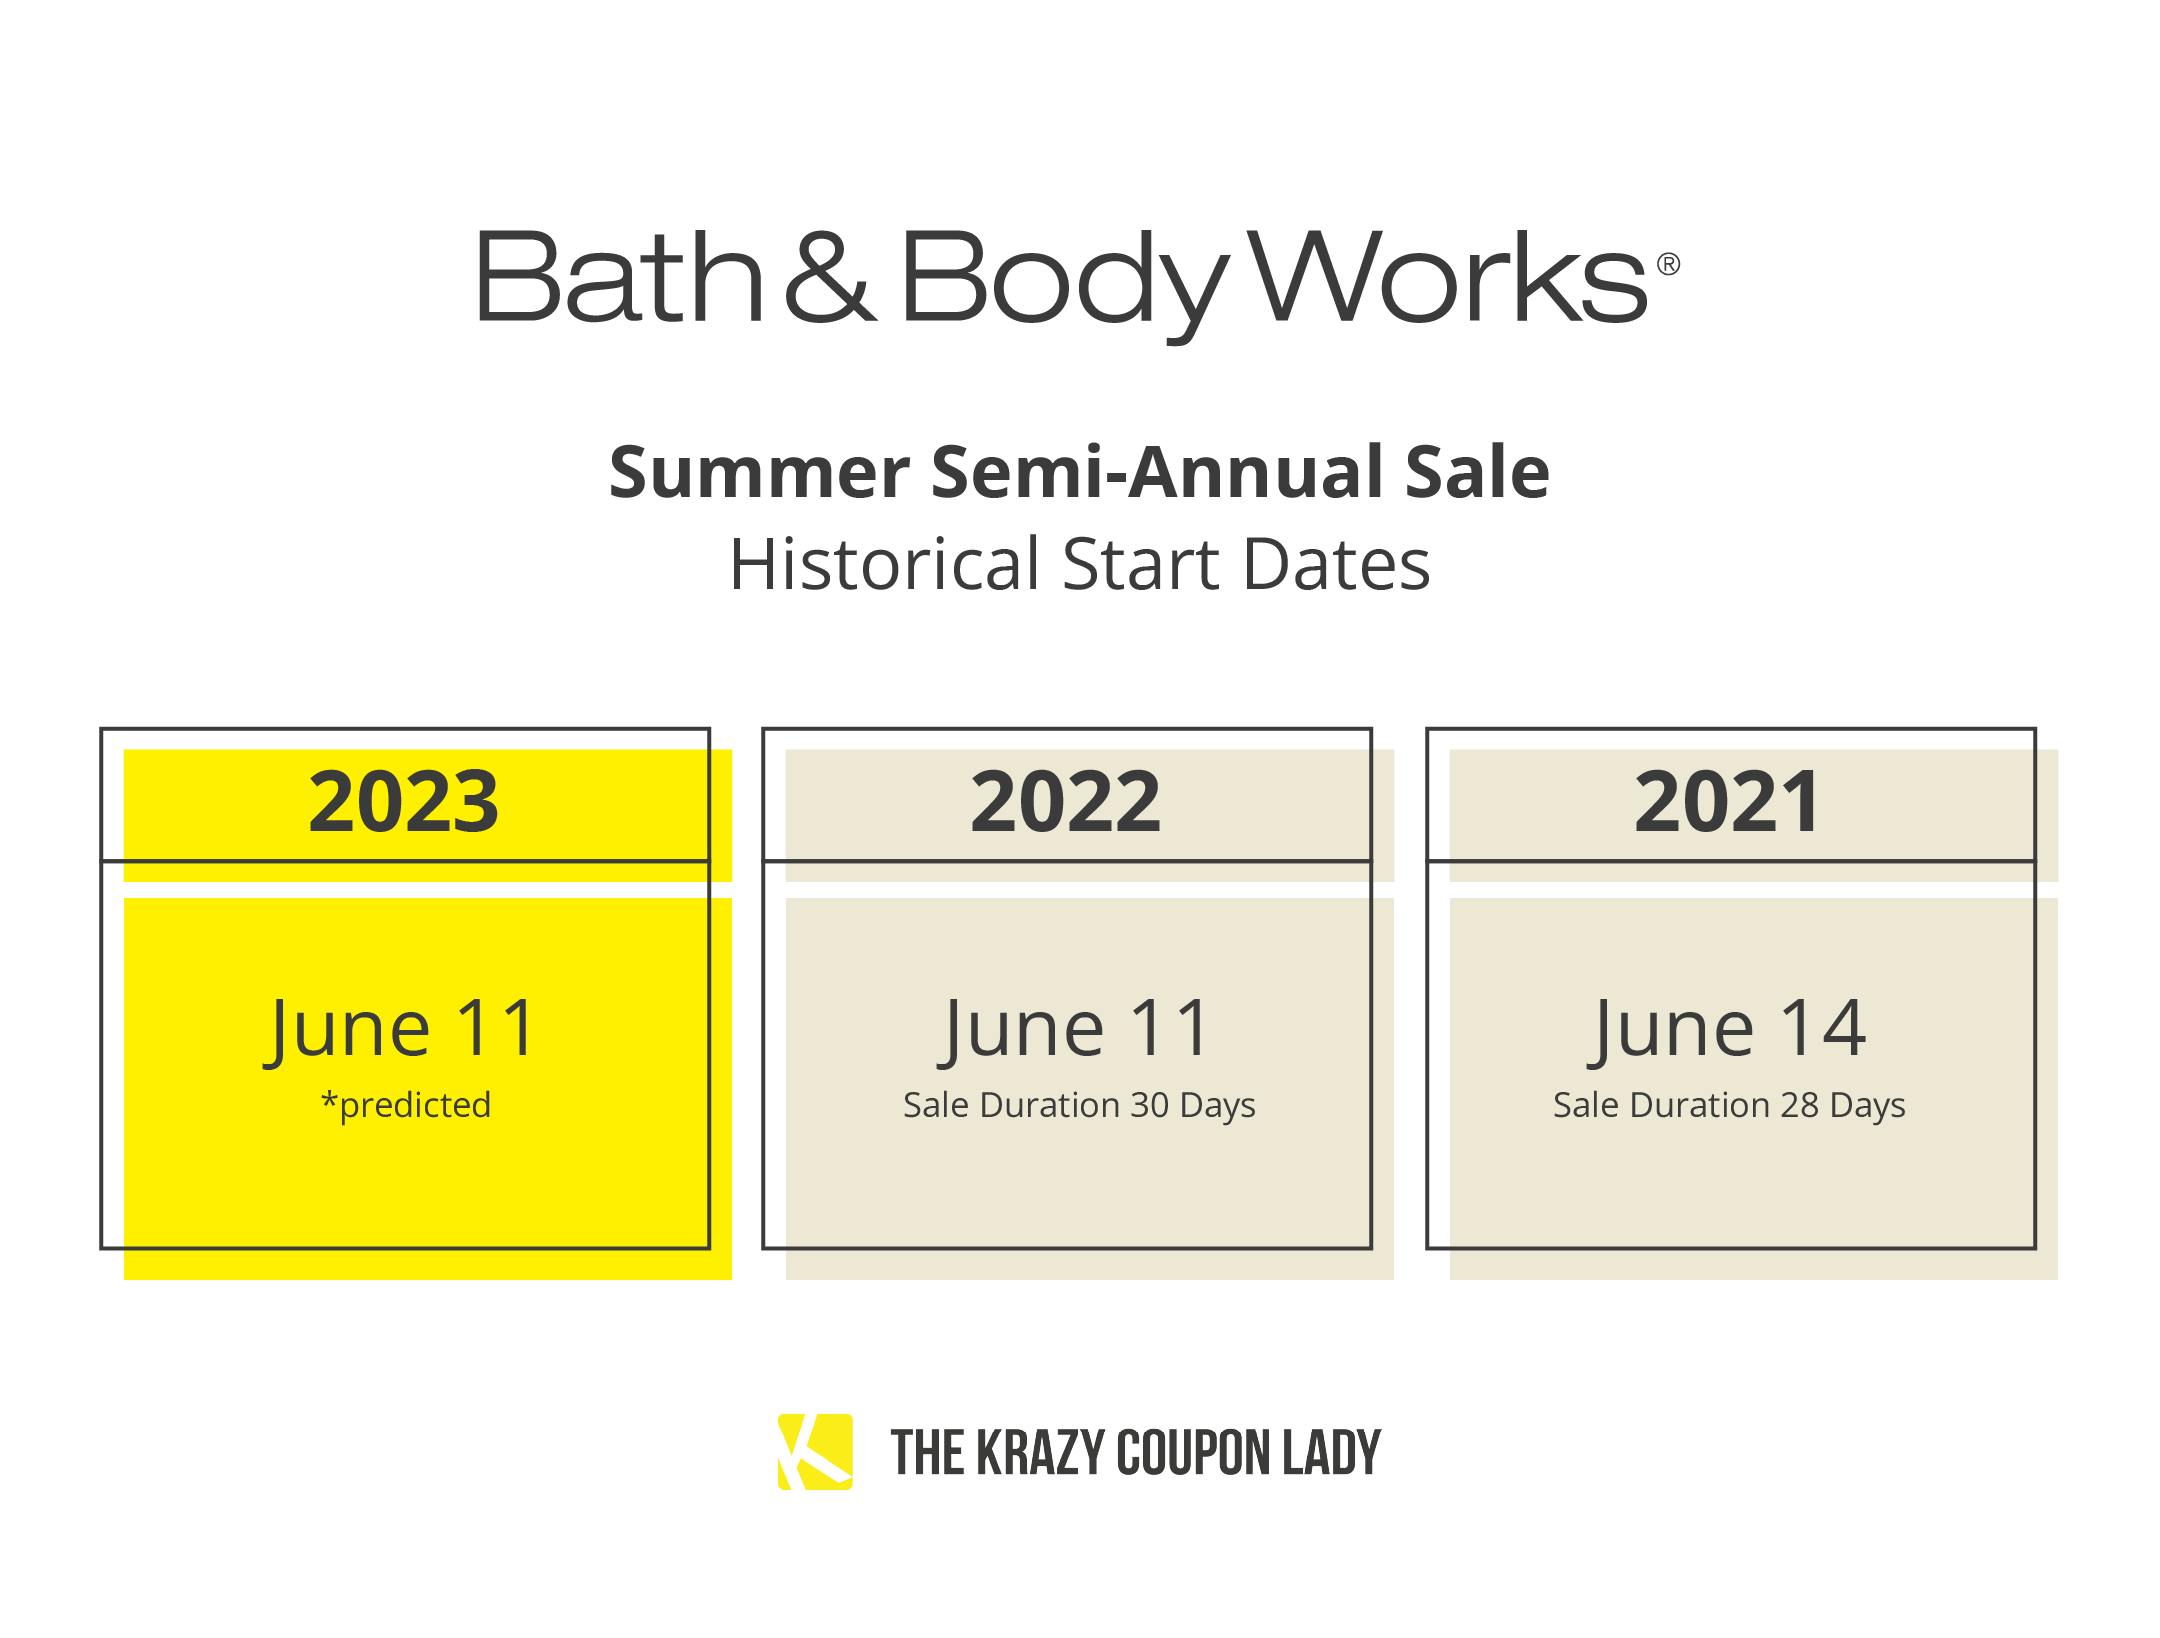 The start dates for the Bath & Body Works Semi-Annual sale in mid-June.